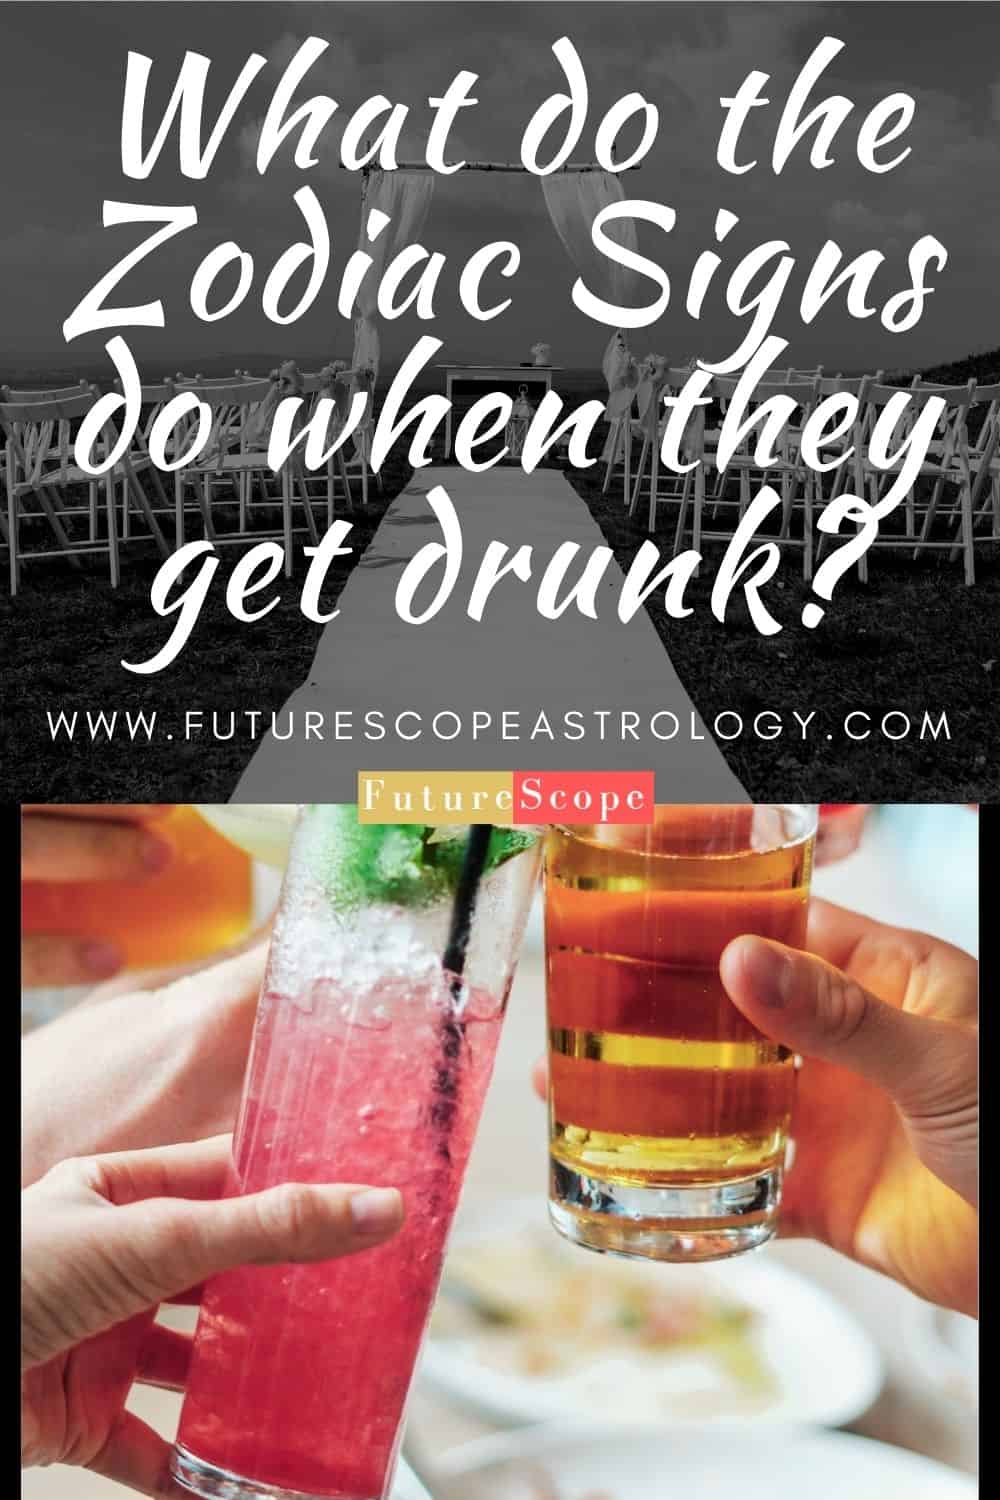 What do the Zodiac Signs do when they get drunk - FutureScope